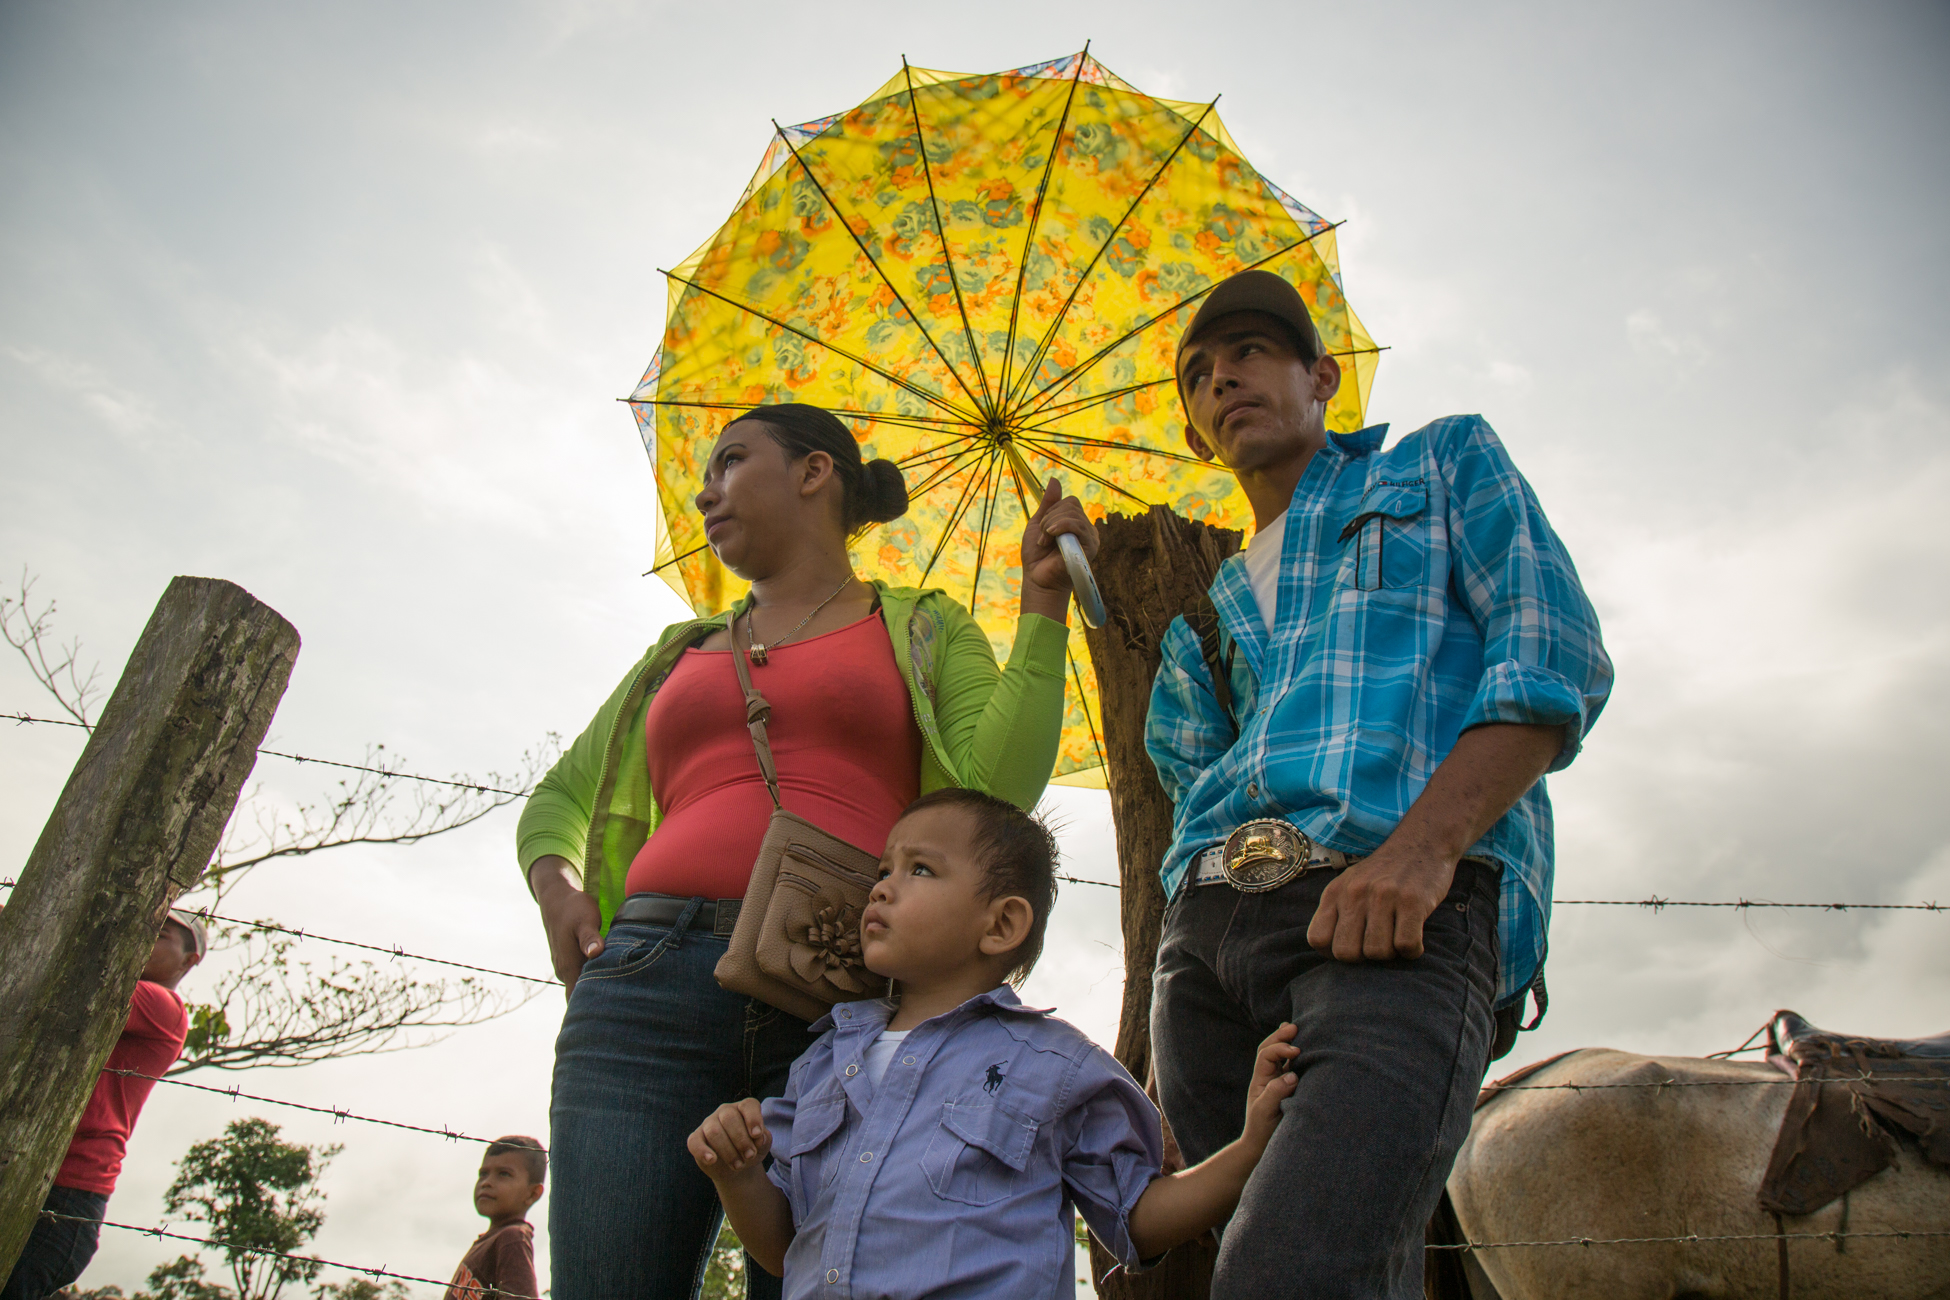  renor Jose Gonsales Rivas, 19 and his wife Irma Aguilar Garcia with their son at a market day in Palo Bonito where they sell goods on the banks of the Punta Gorda river in the early morning. If the Gran Canal project were to go forward, the river wo